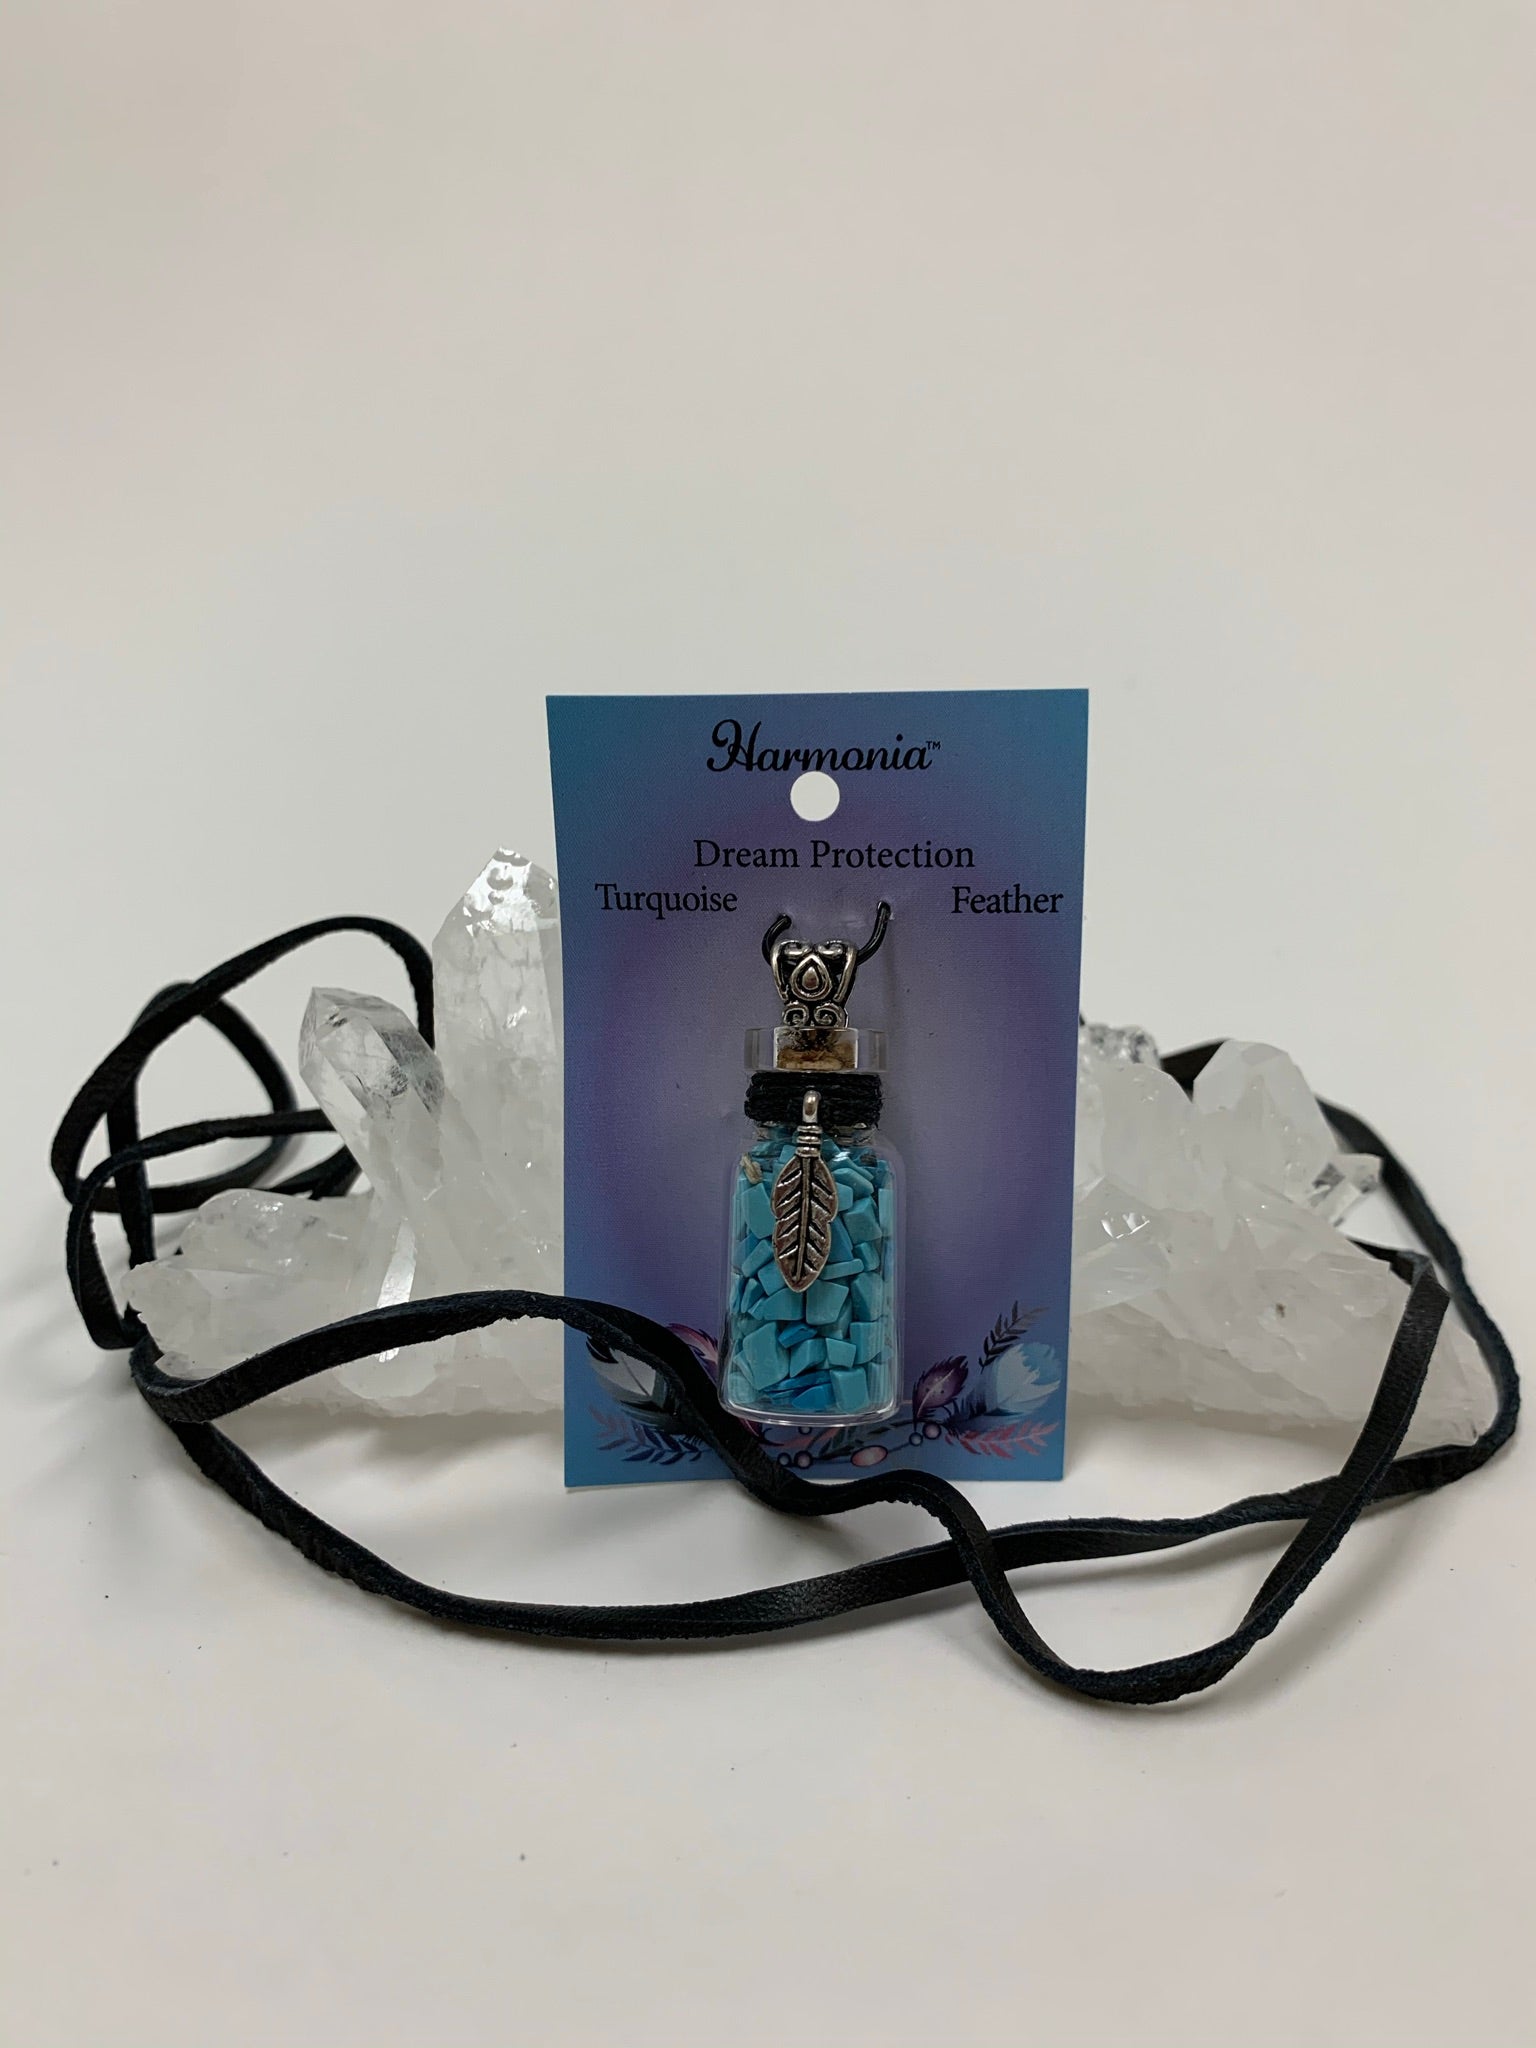 View with suede cord displayed. Gemstone (corked) chip bottle necklace with little turquoise chips inside, accented by a silver-colored feather and fancy jewelry bail on the outside. Silver is not sterling. Thin suede cord is included to be used as a necklace.